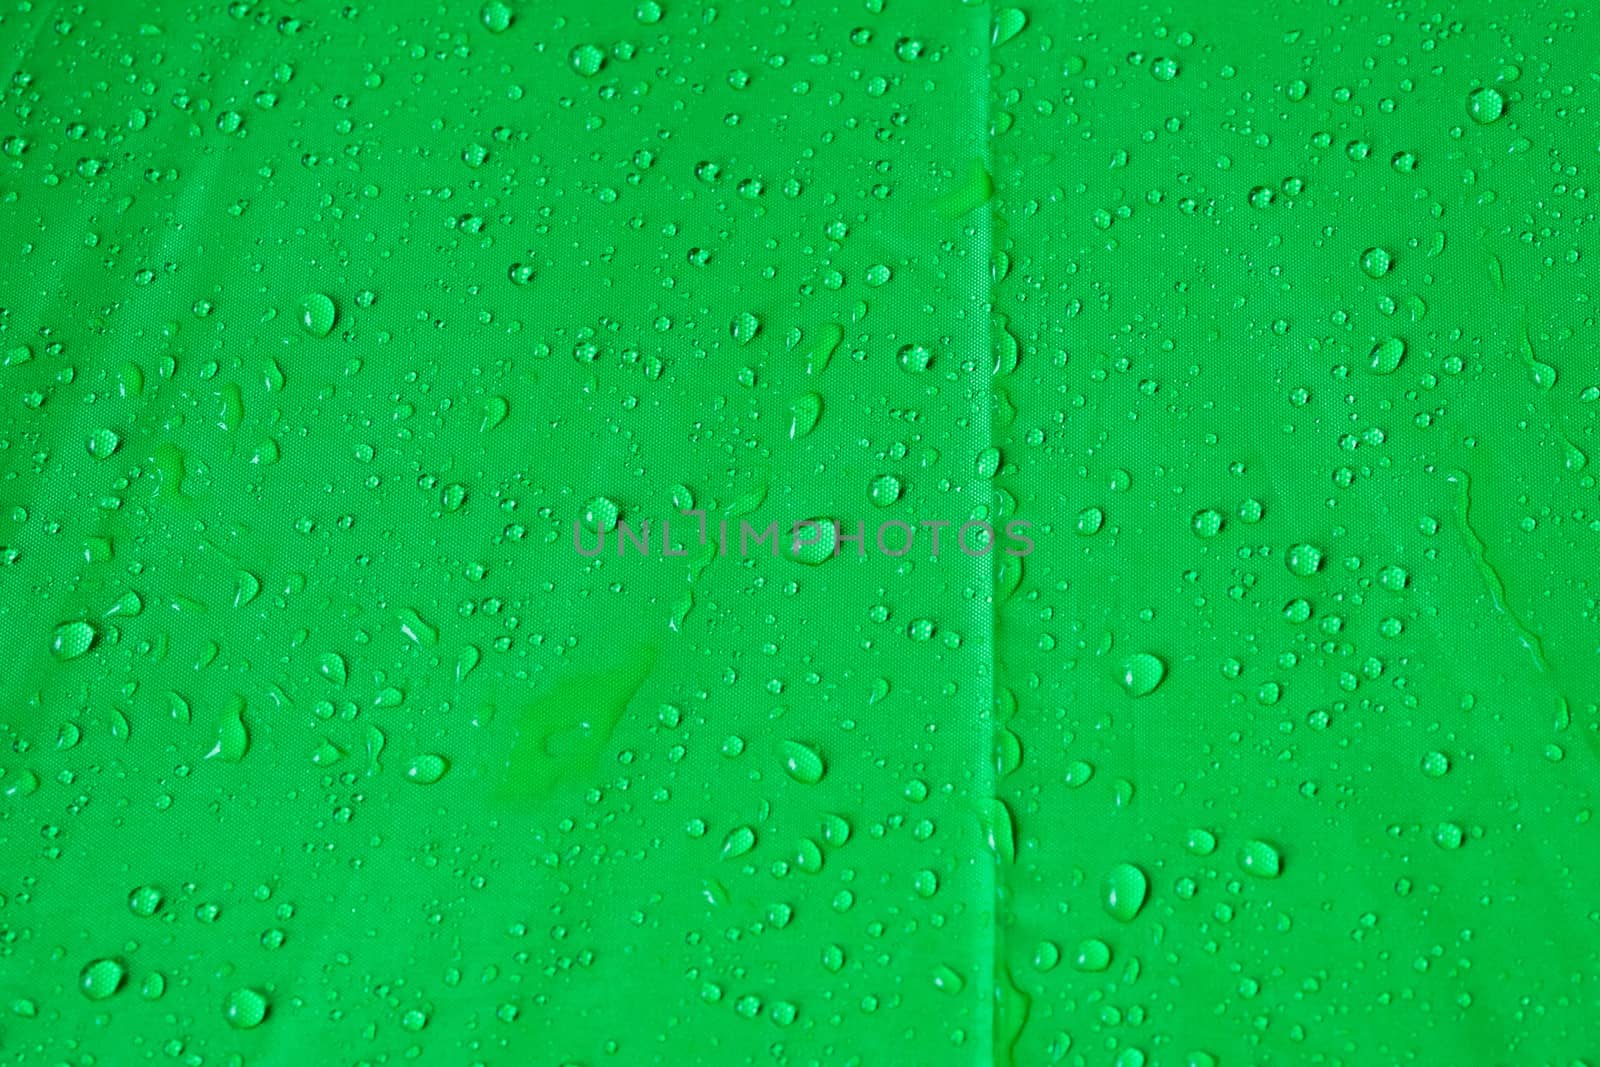 drops of water on green canvas by moggara12